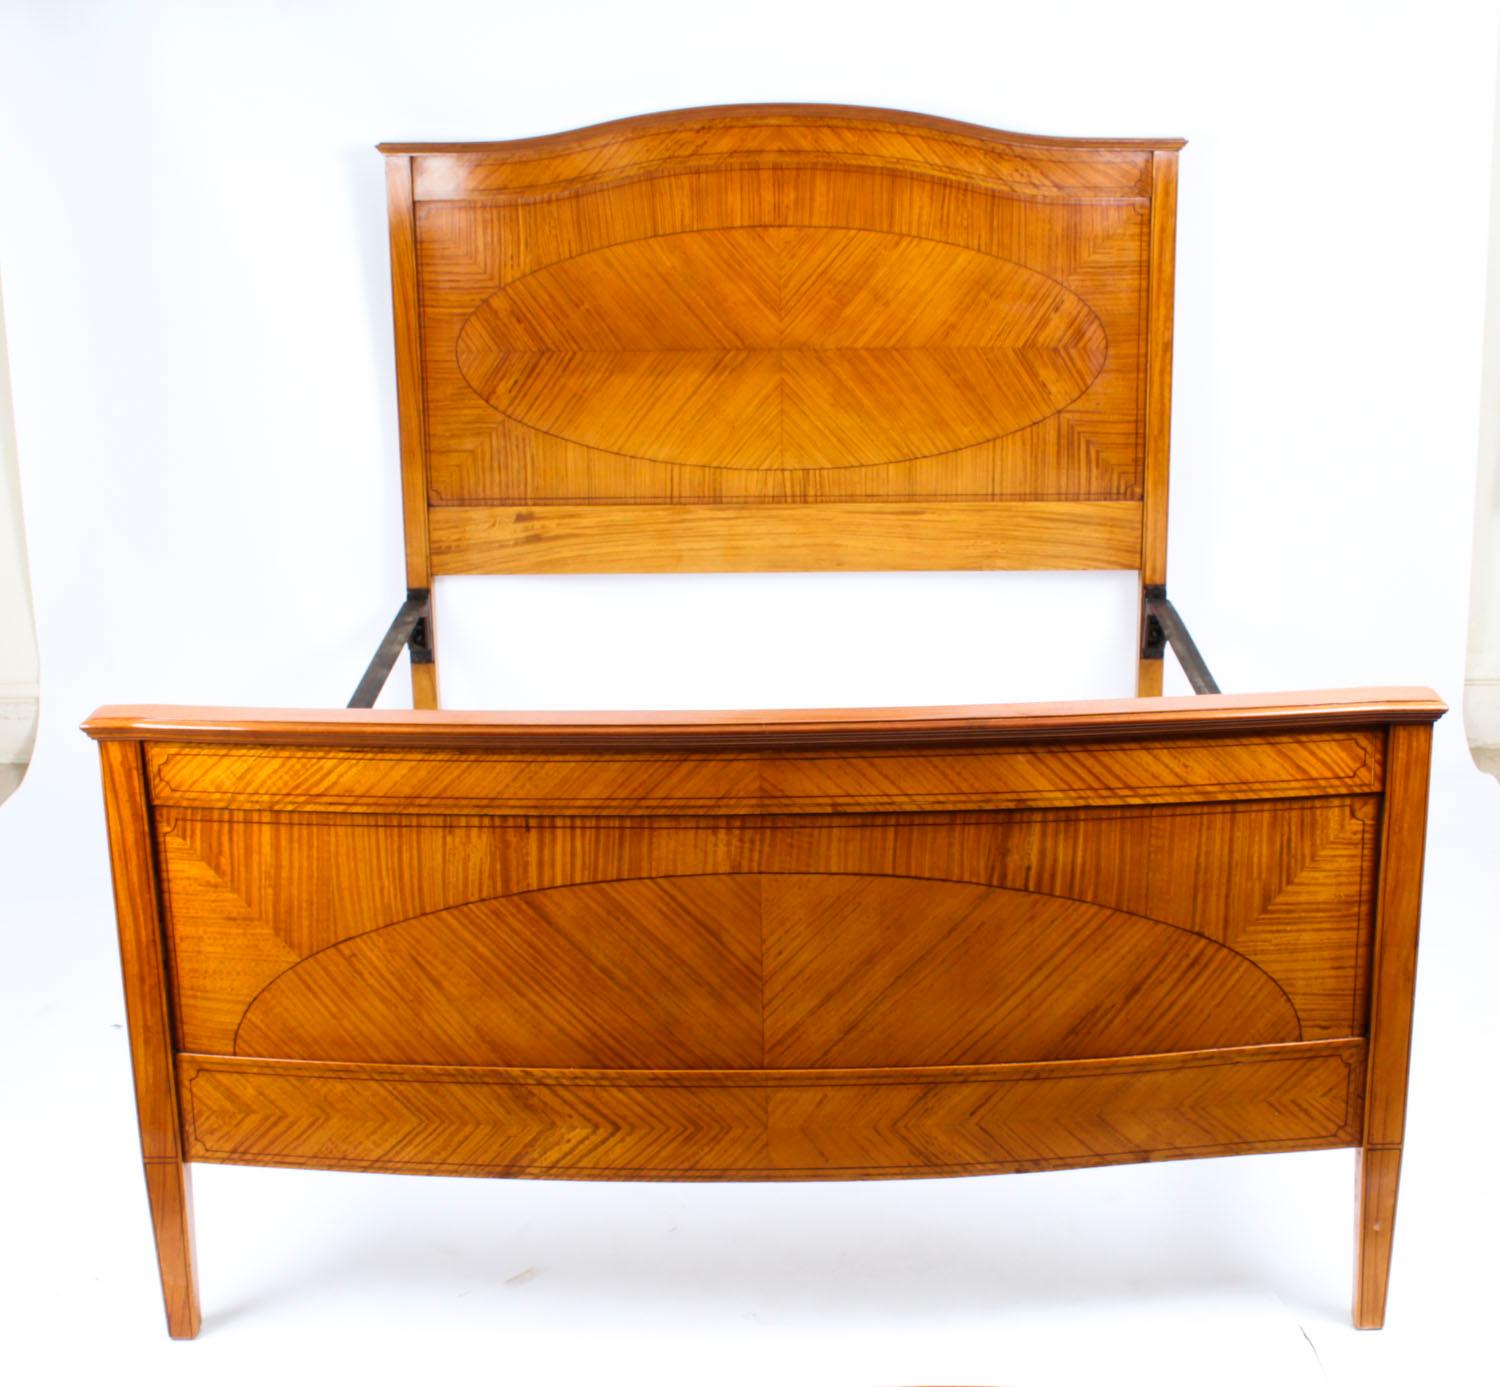 A beautiful antique Edwardian satinwood single bed stand, late 19th century in date.

The bed features an arched headboard and bowed footboard in fabulous quarter veneered satinwood with decorative ebonized line inlay. The bed is supported on